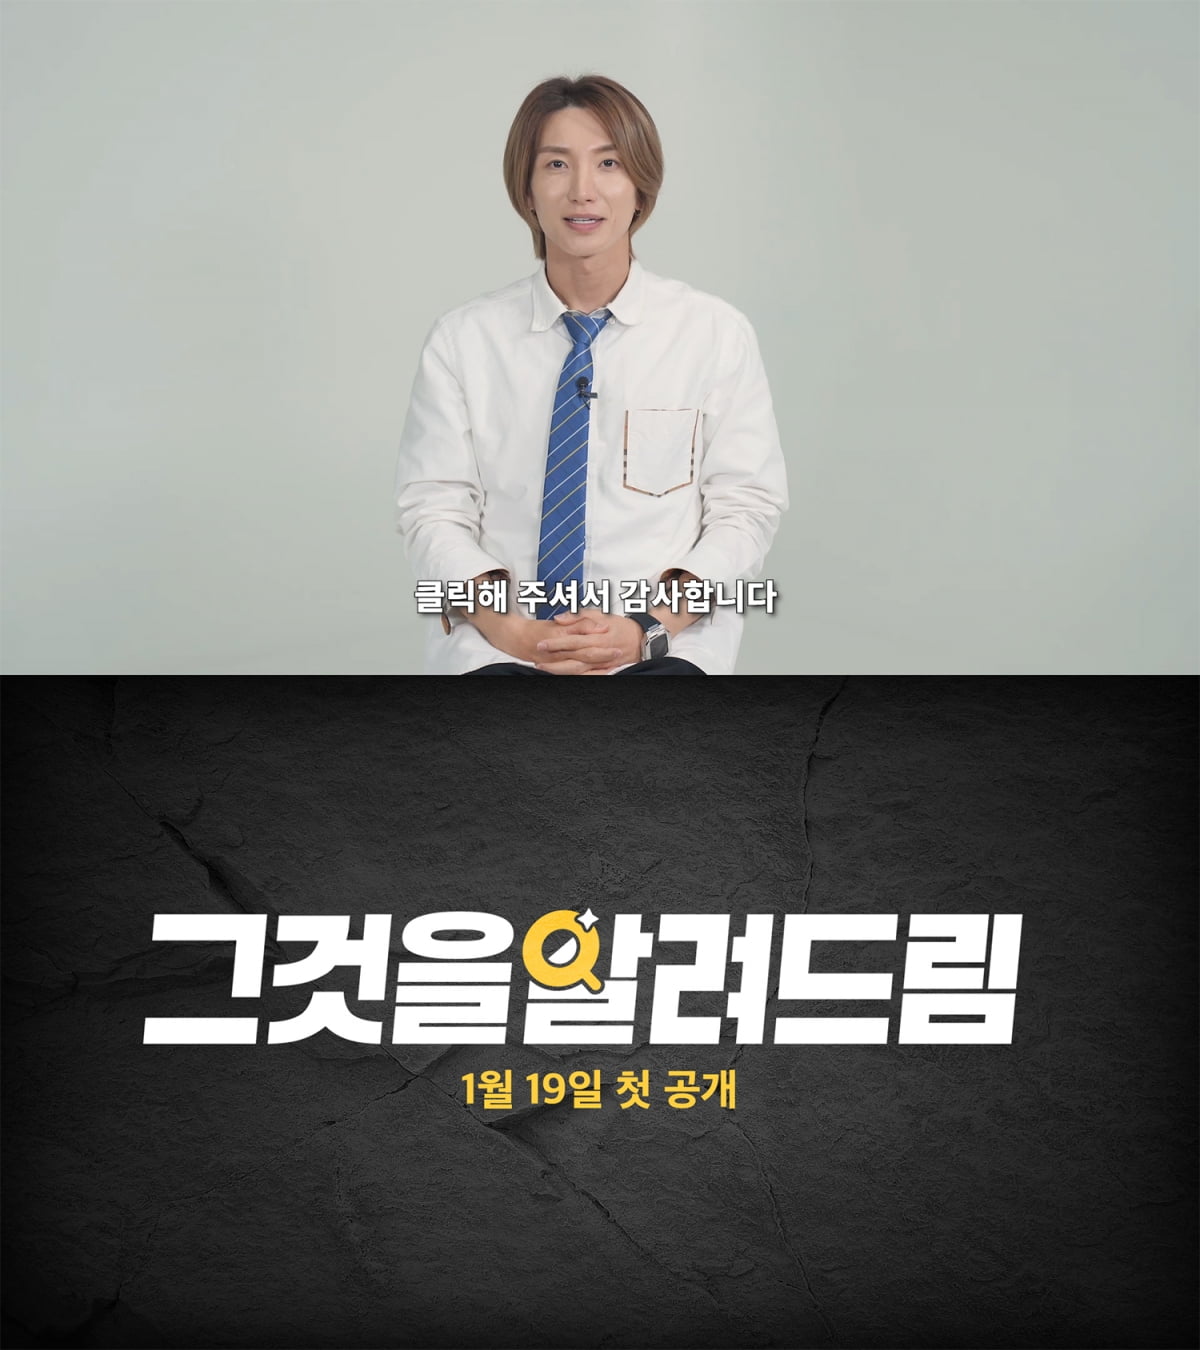 Leeteuk also expands his base as a YouTuber... ‘I’ll tell you that’ MC